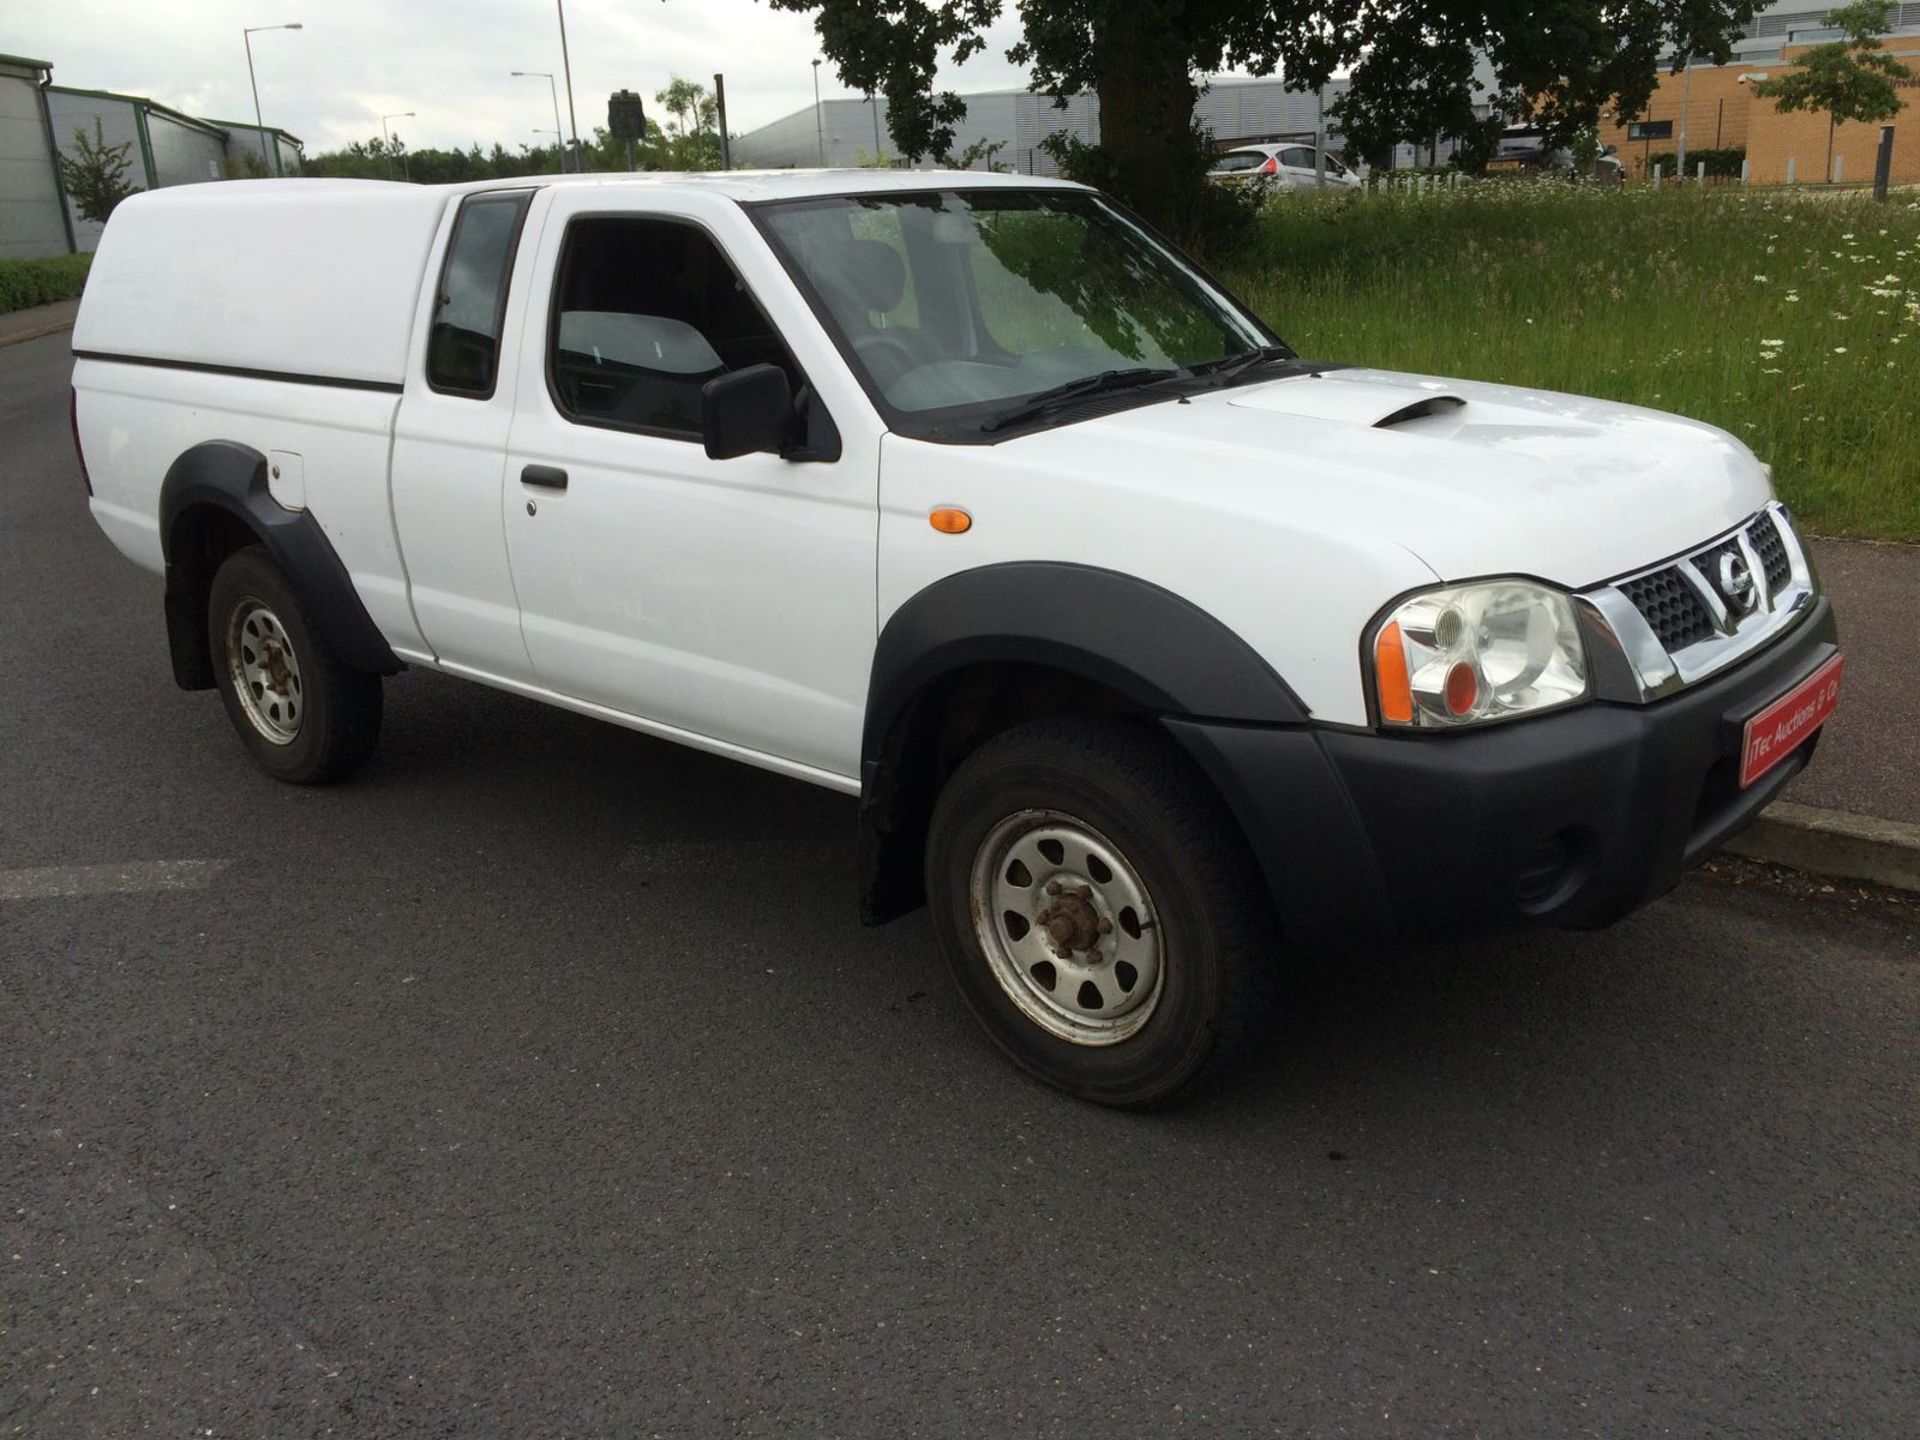 (EX POLICE) 2005 NISSAN D22 2.5 DI 4X4 - Image 2 of 13